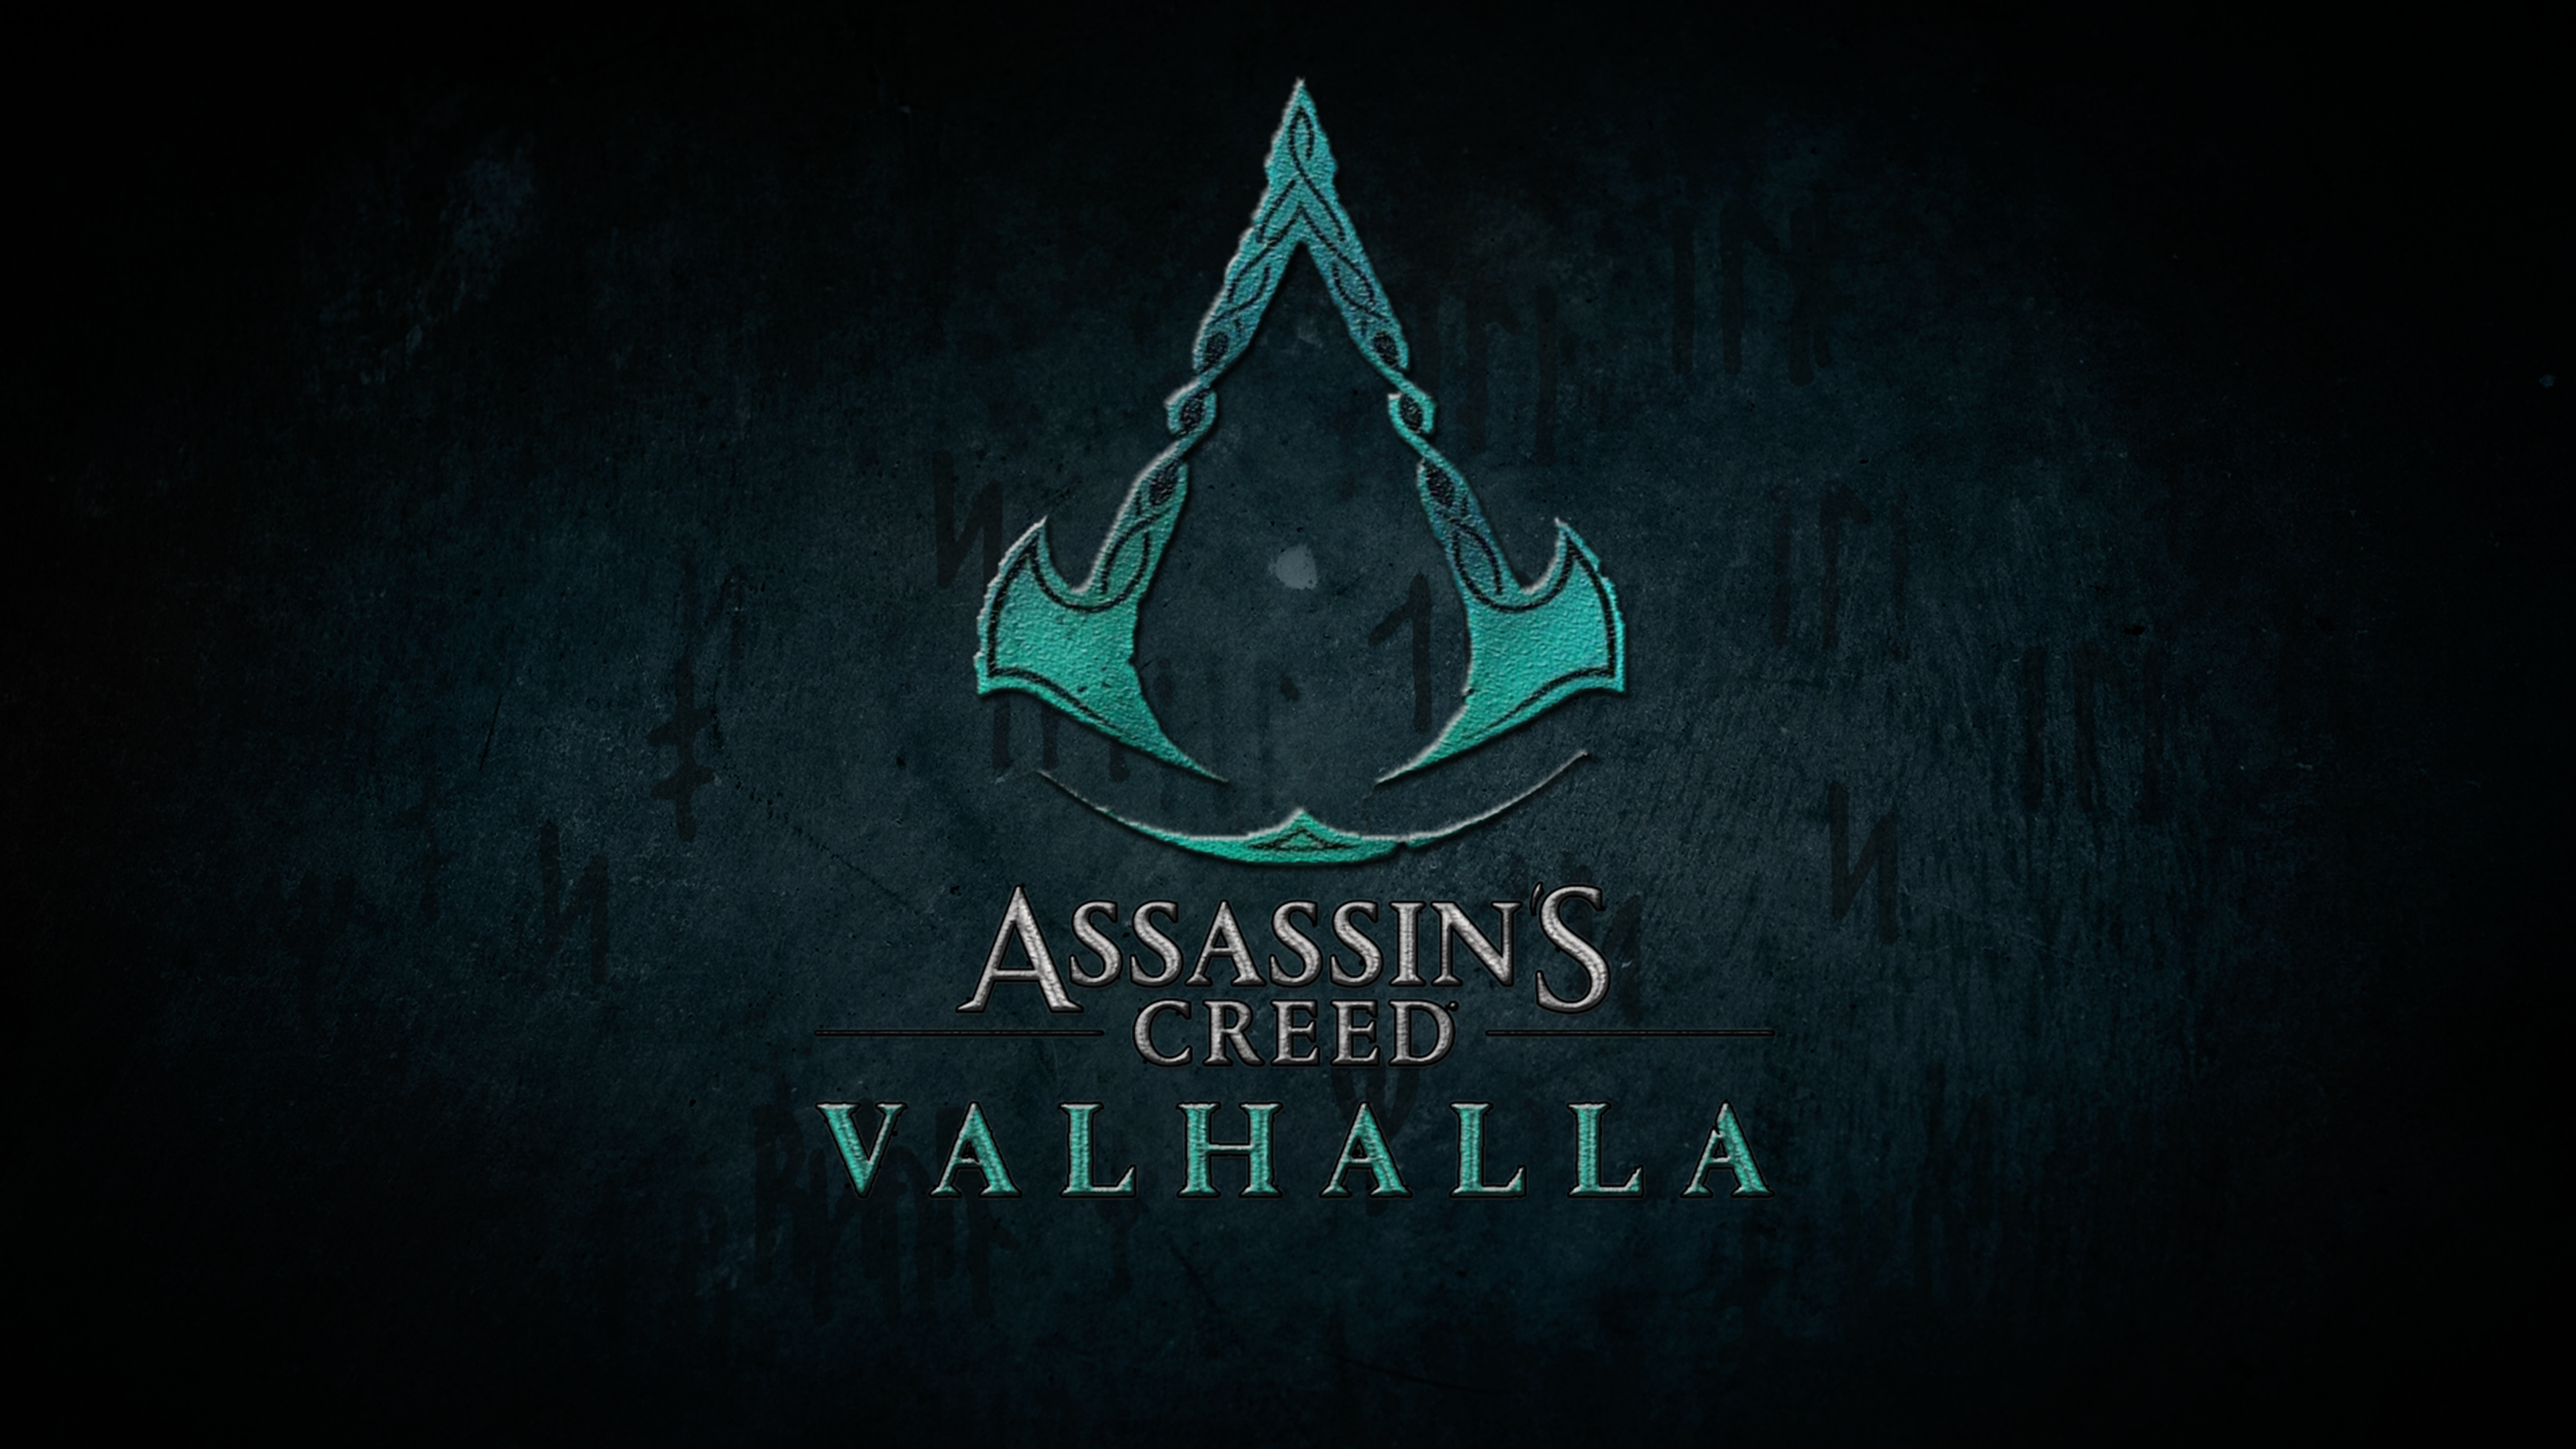 Valhalla 4K wallpaper for your desktop or mobile screen free and easy to download